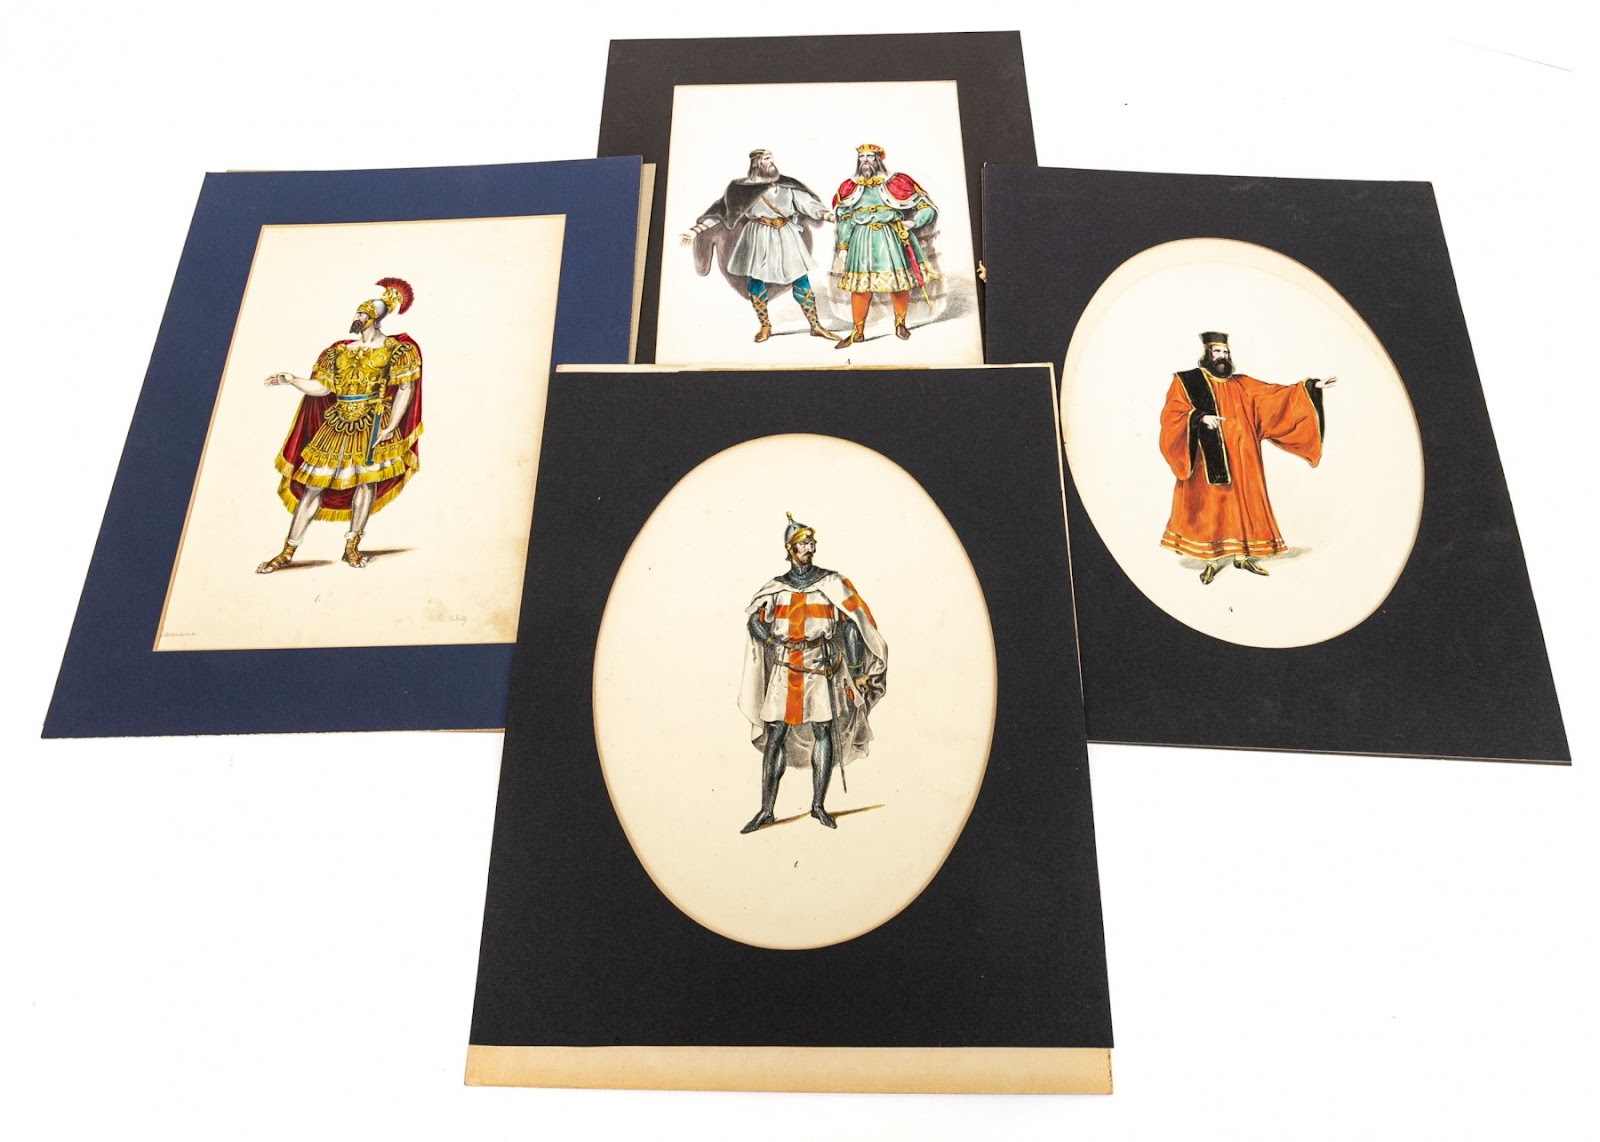 Antique Set of 4 Hand Colored Drawings Depicting Global Figures